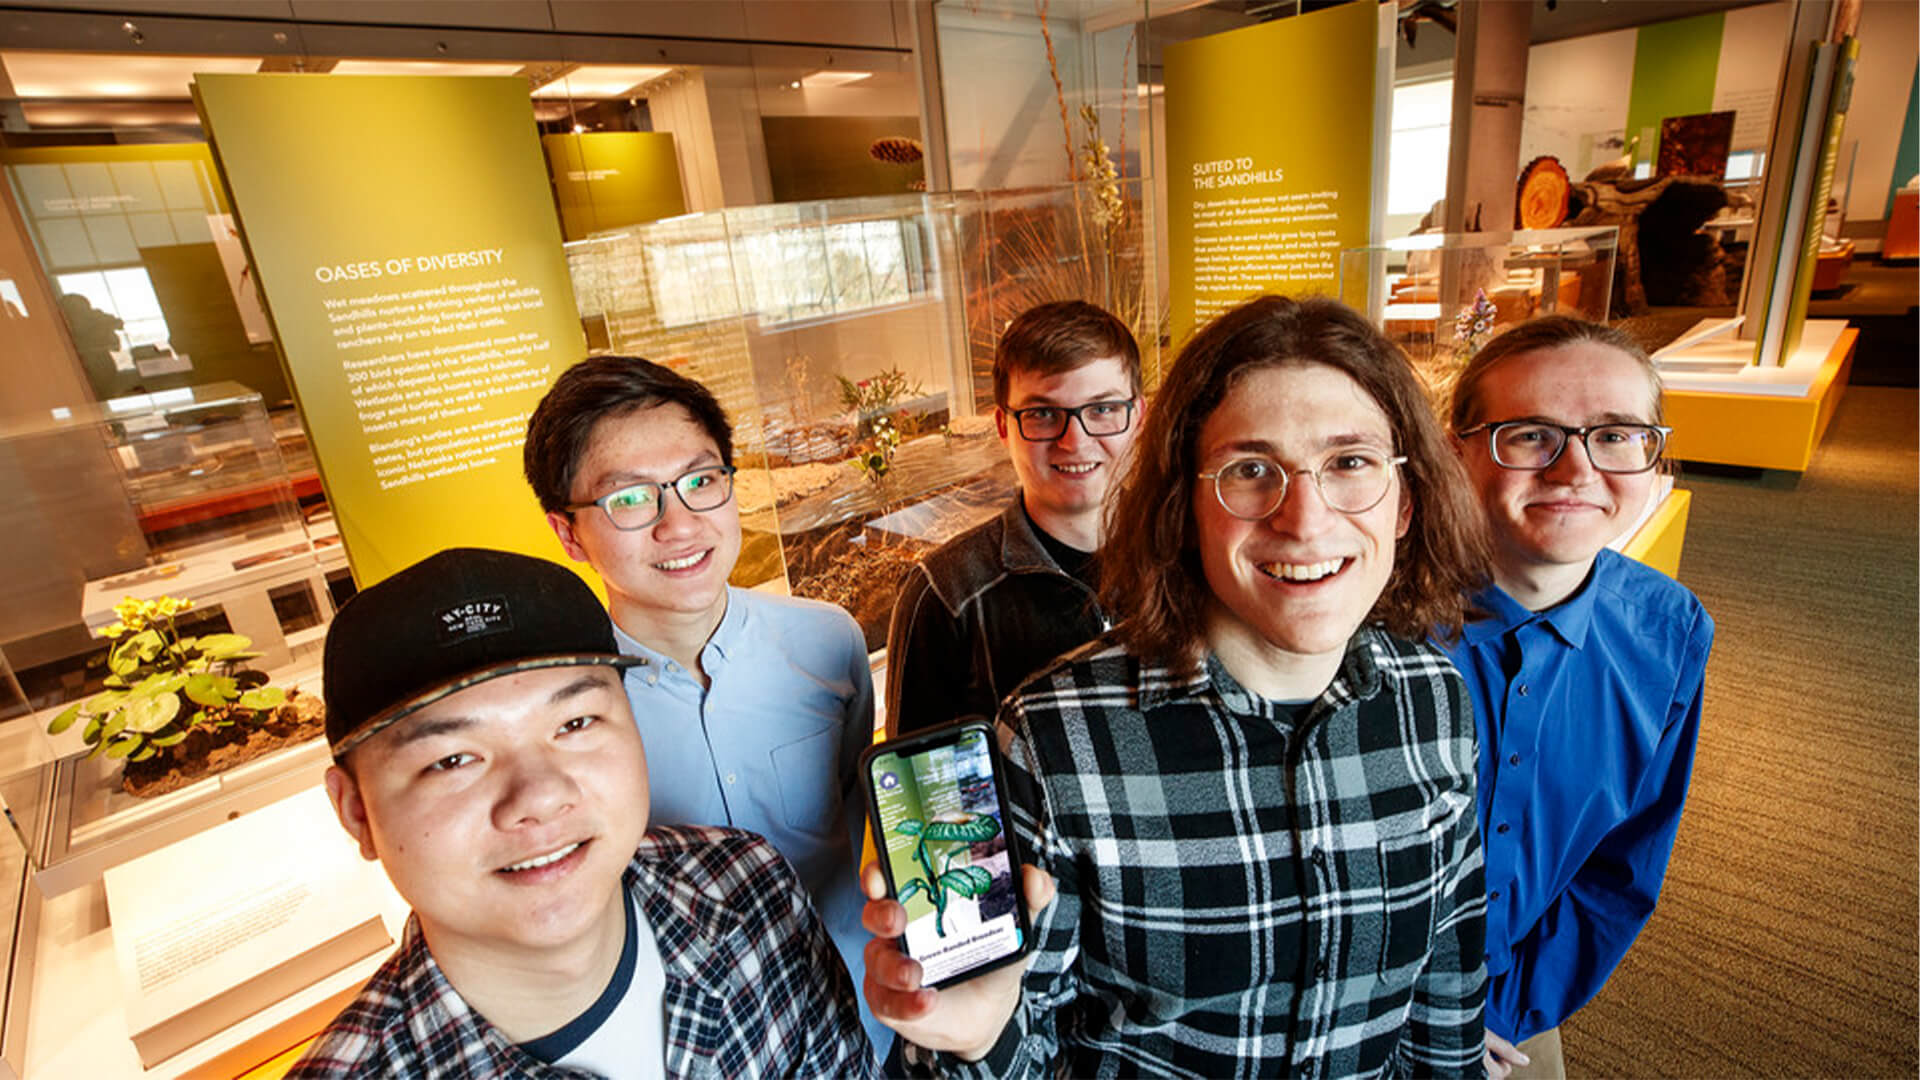 Group of students show off their app in front of Oasis of Diversity exhibition at museum.